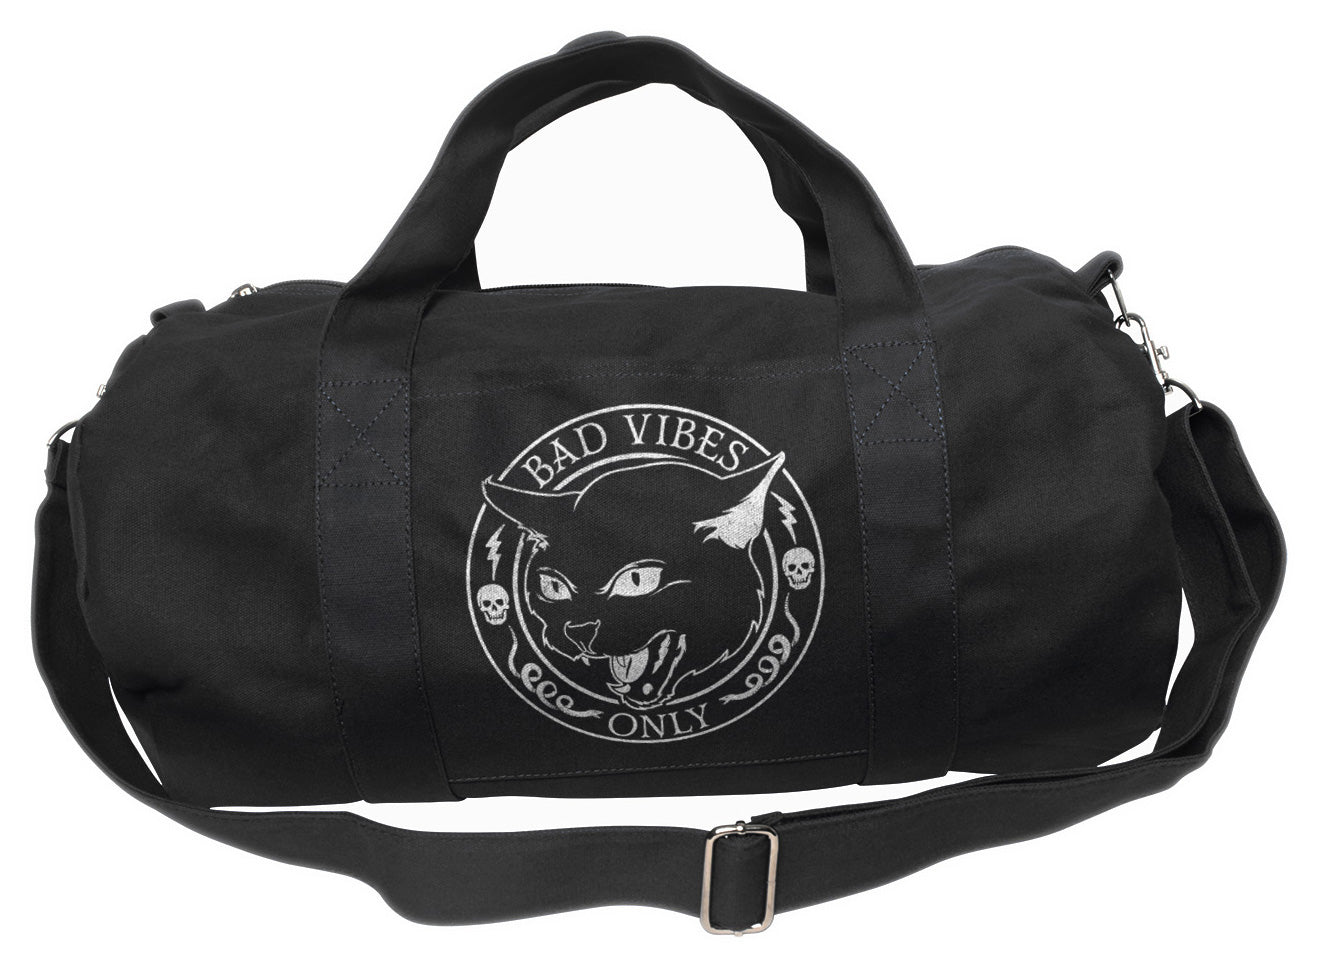 Bad Vibes Only Duffel Bag